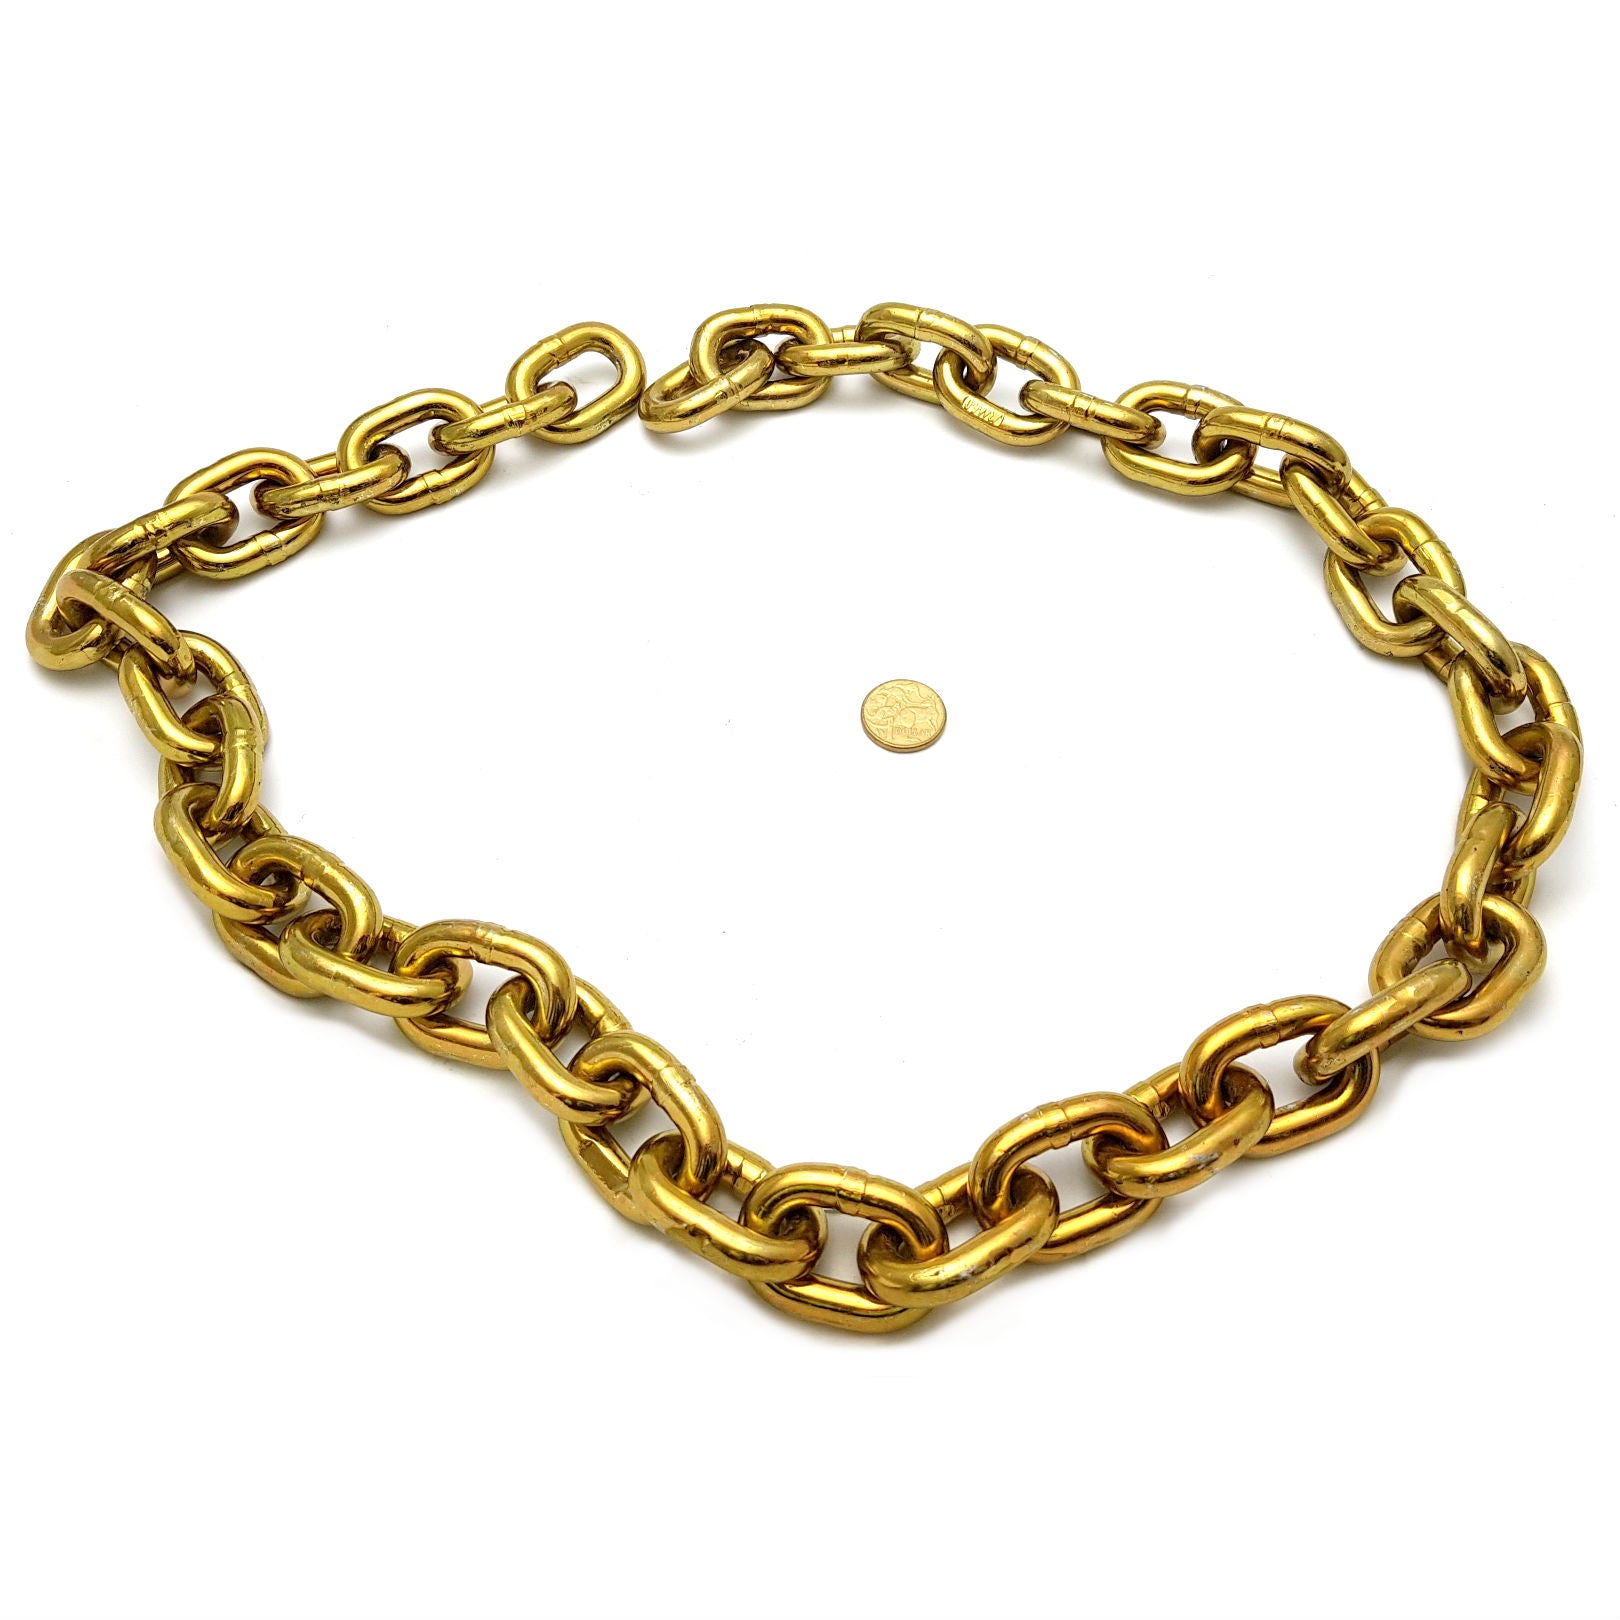 Hardened security chain, size: 10mm, order 2 metres. Australia wide delivery